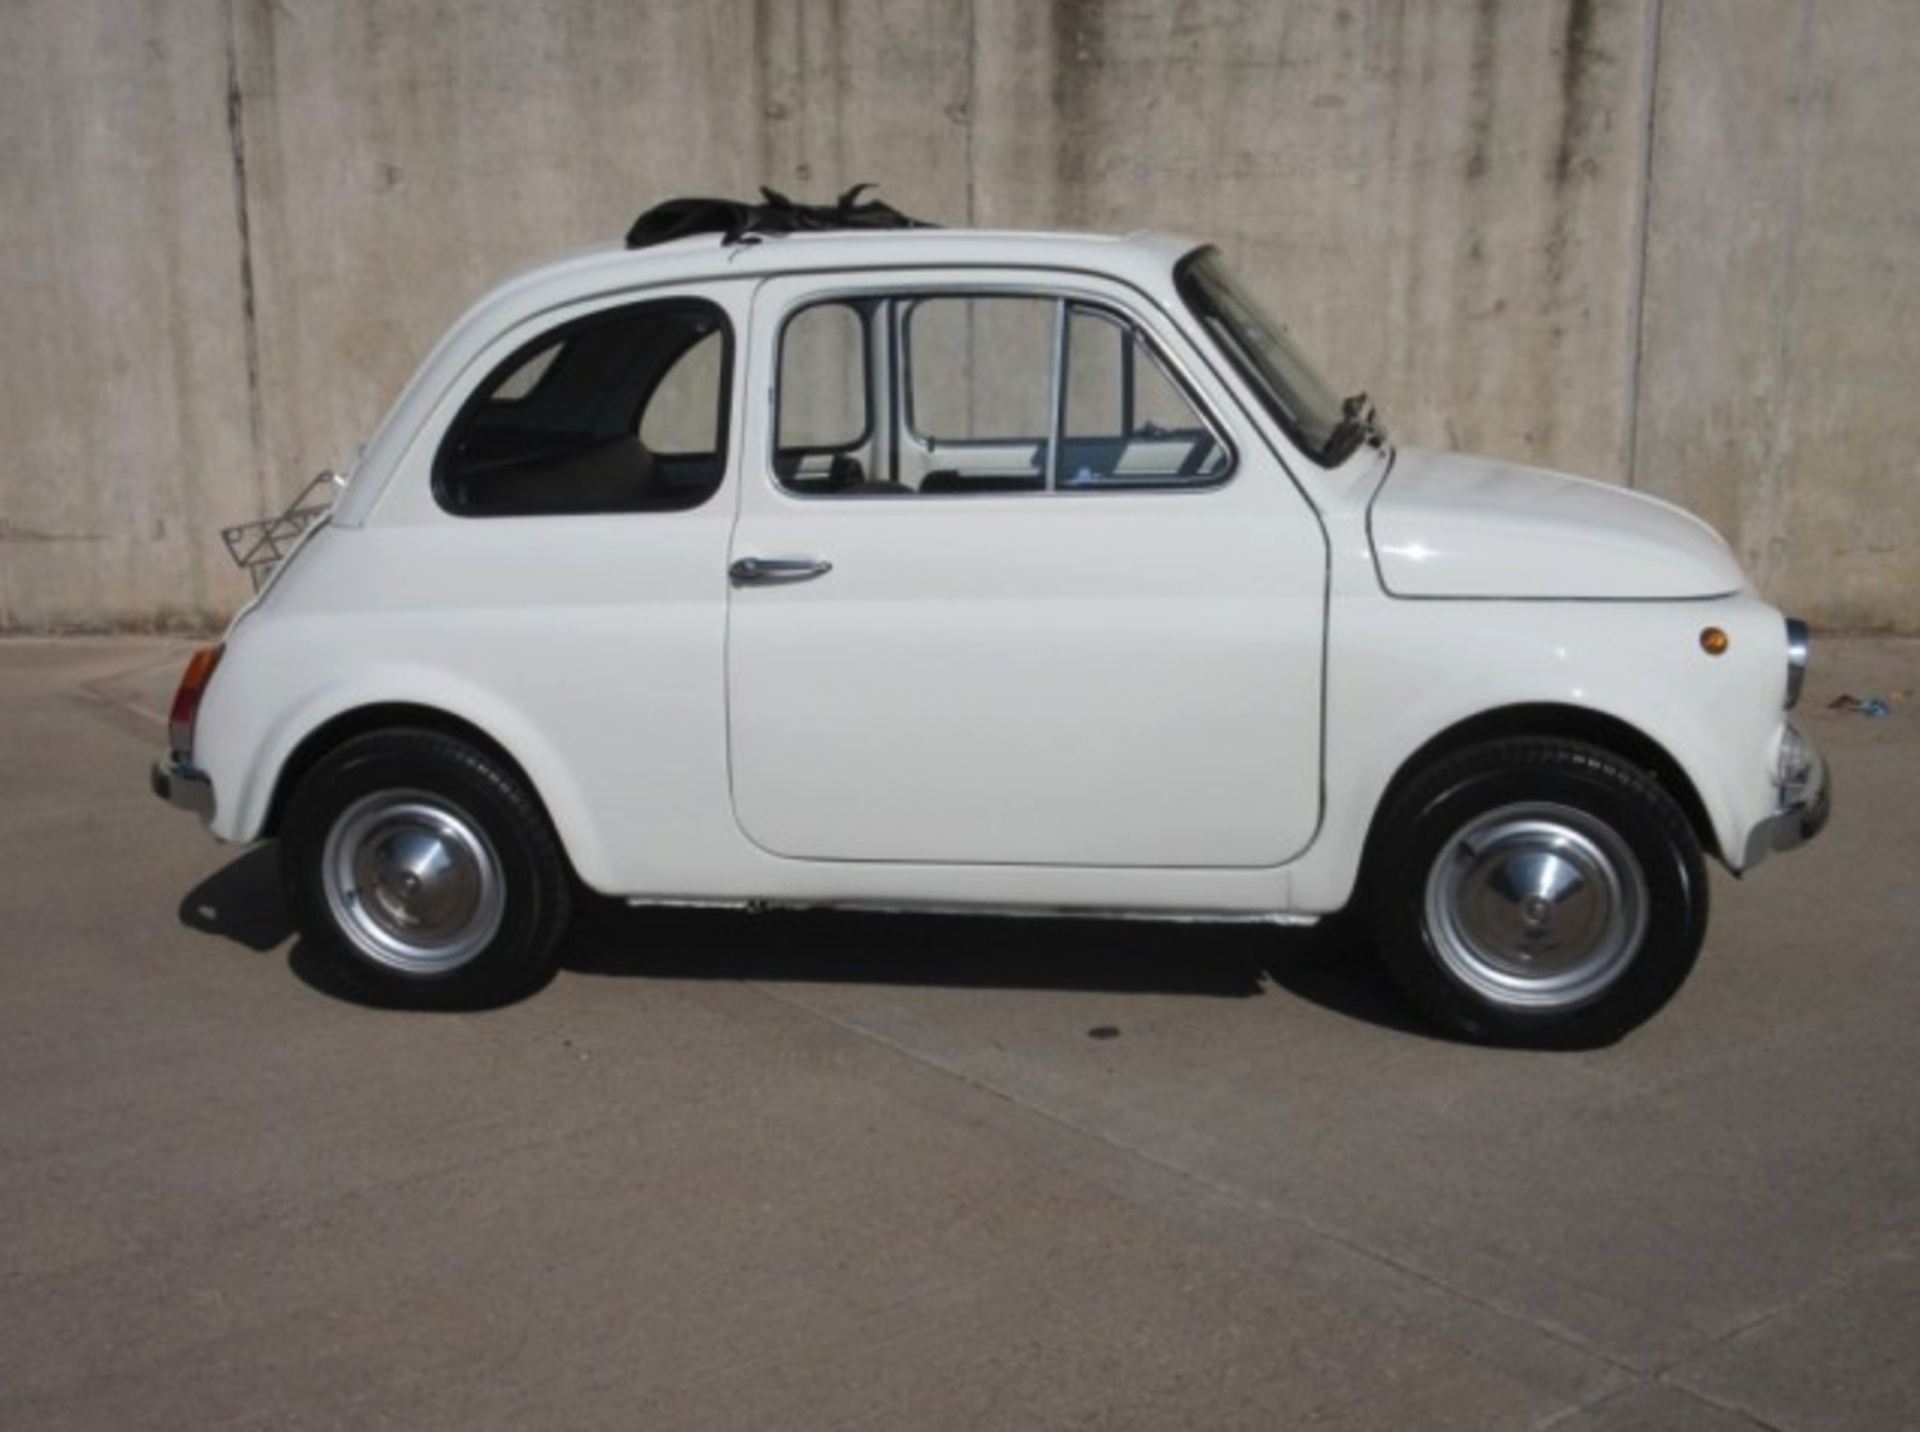 Fiat 500 in White Fully Restored & Detailed - Image 16 of 18